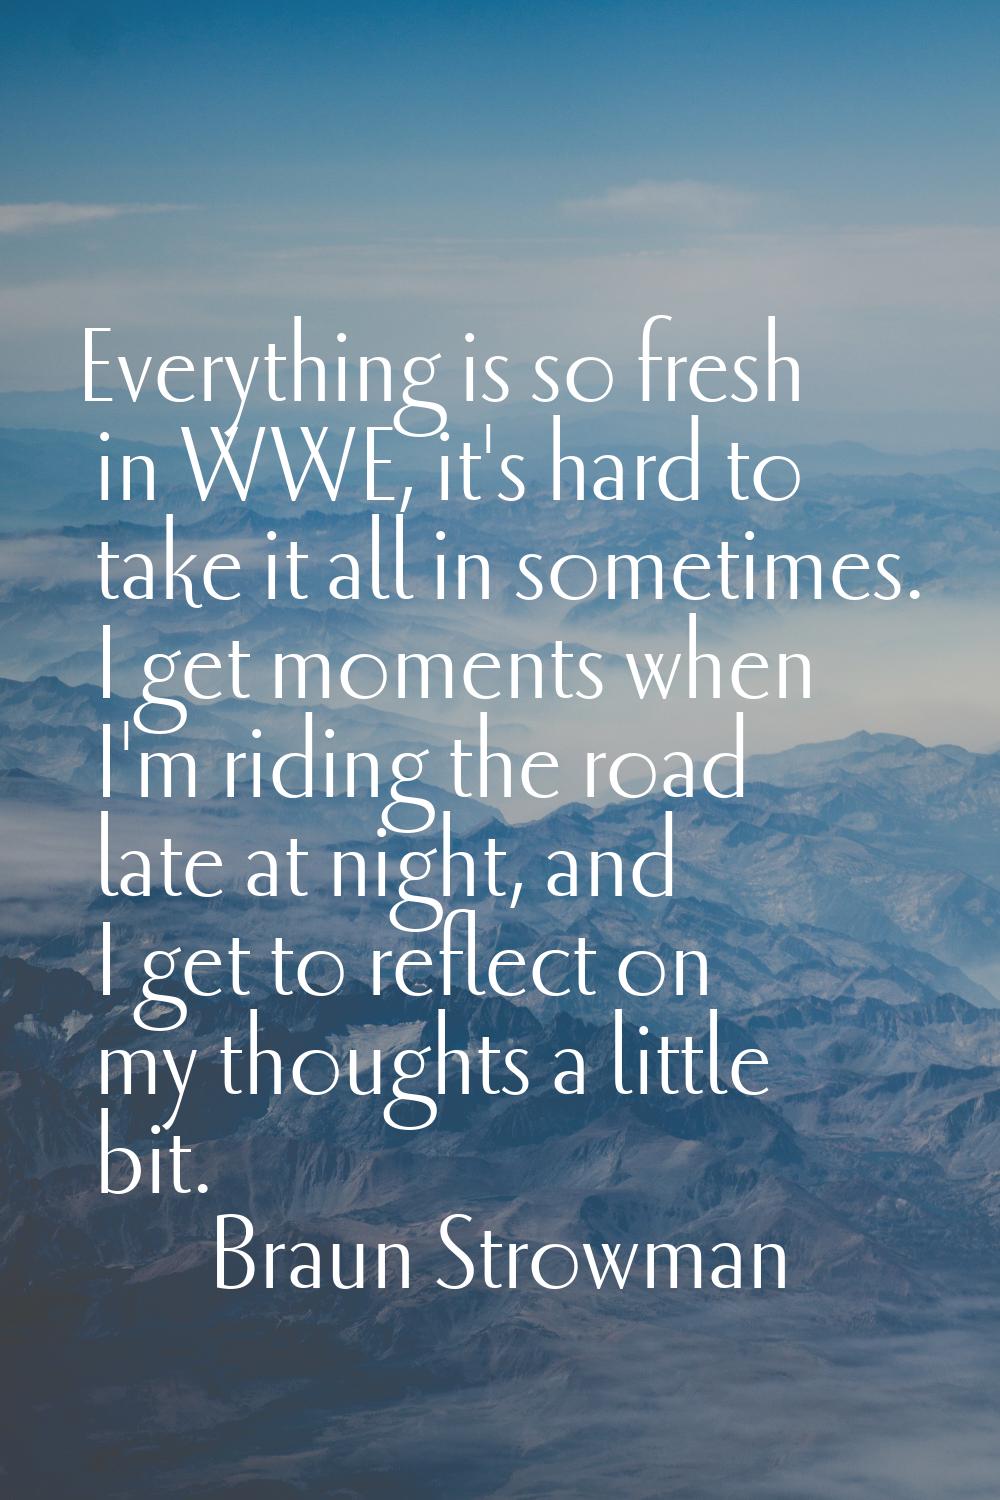 Everything is so fresh in WWE, it's hard to take it all in sometimes. I get moments when I'm riding